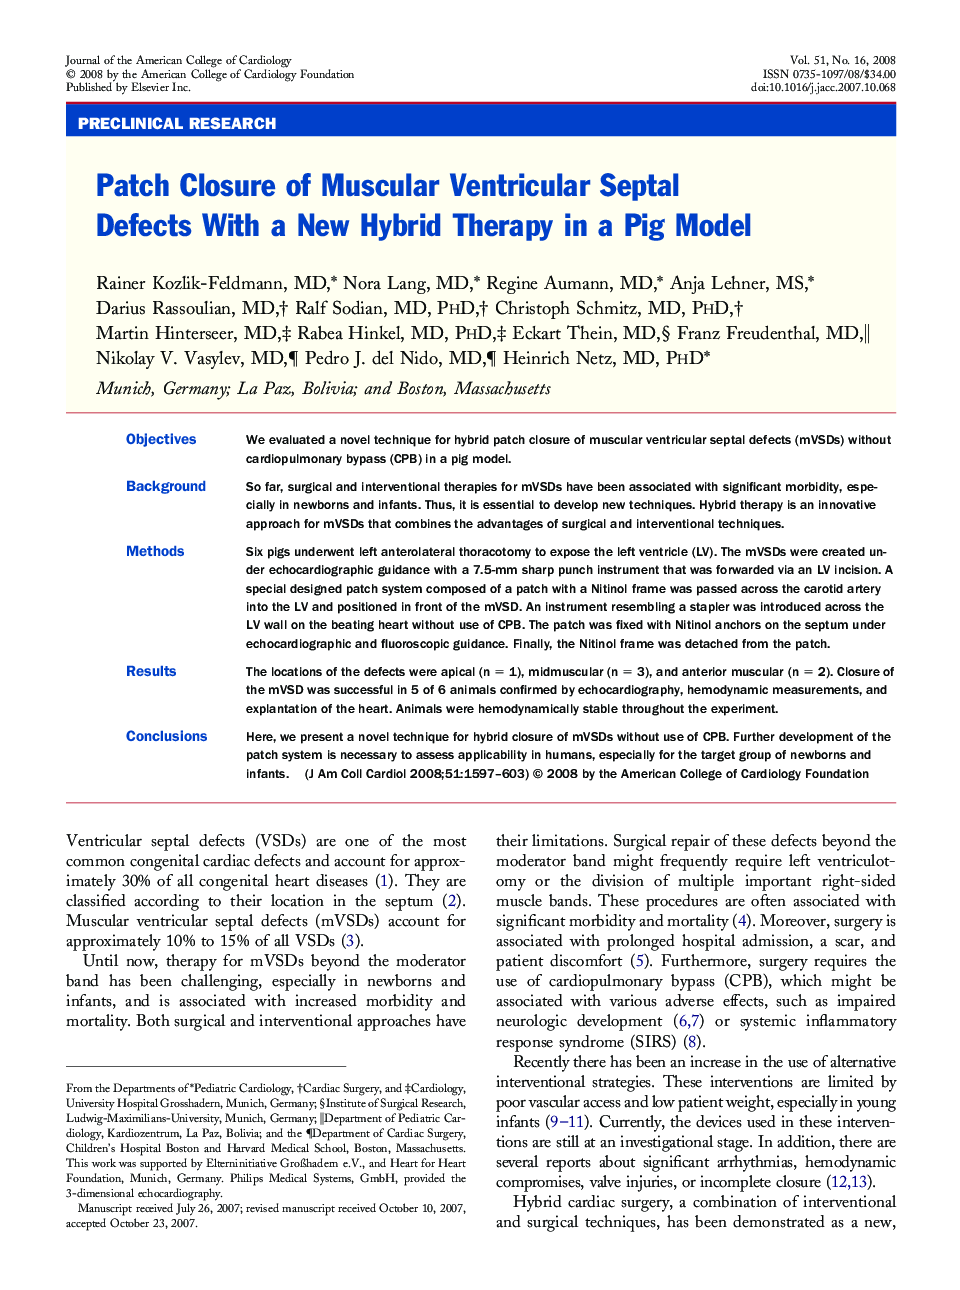 Patch Closure of Muscular Ventricular Septal Defects With a New Hybrid Therapy in a Pig Model 